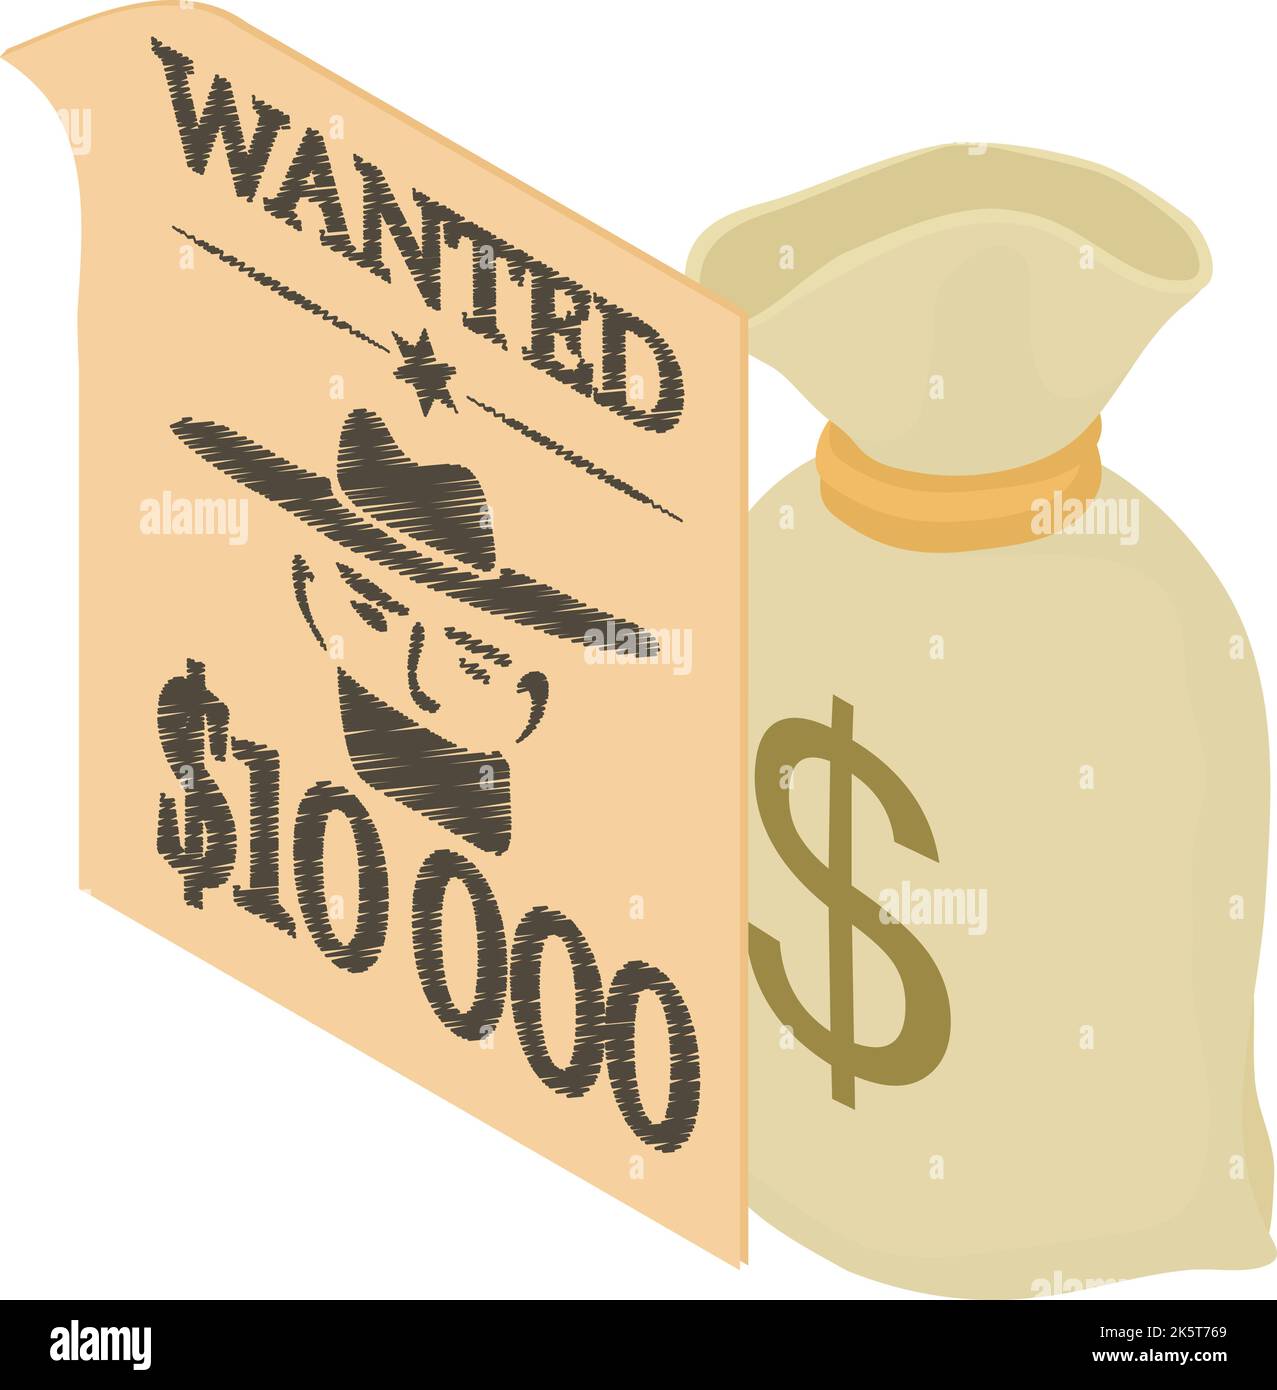 Wildwest symbol icon isometric vector. Cash money bag and wanted poster icon. Texas wild west, western Stock Vector